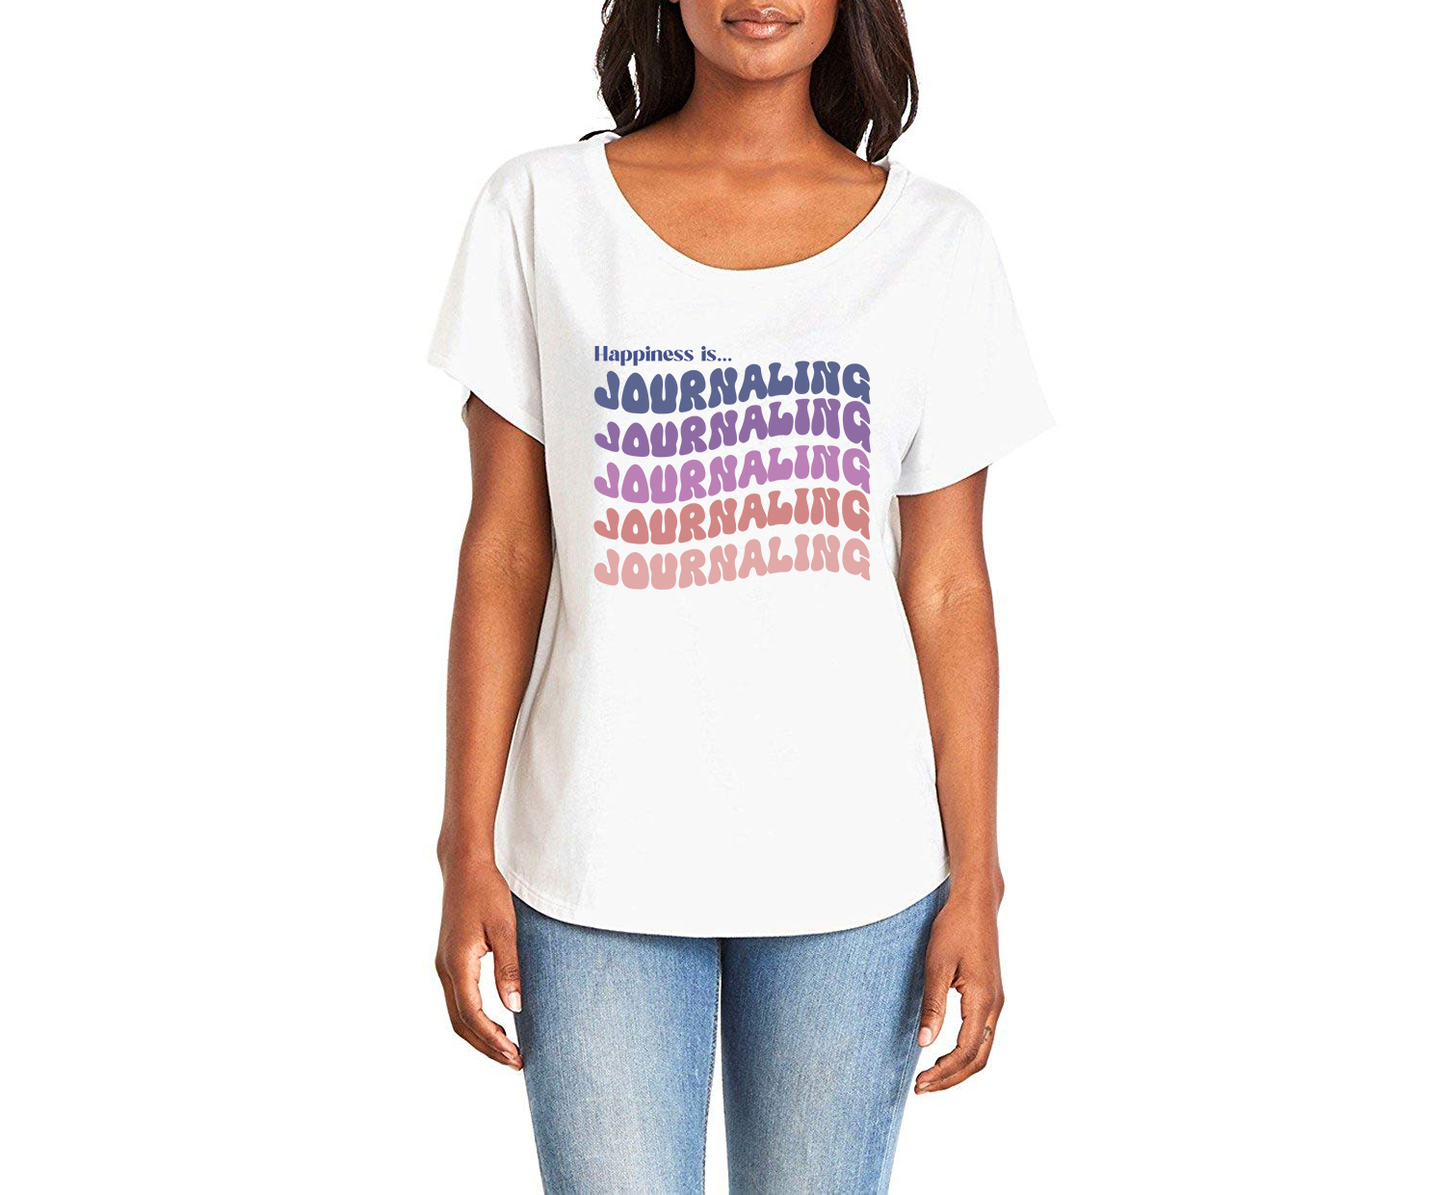 Happiness is Journaling Ladies Tee Shirt - In White & Grey